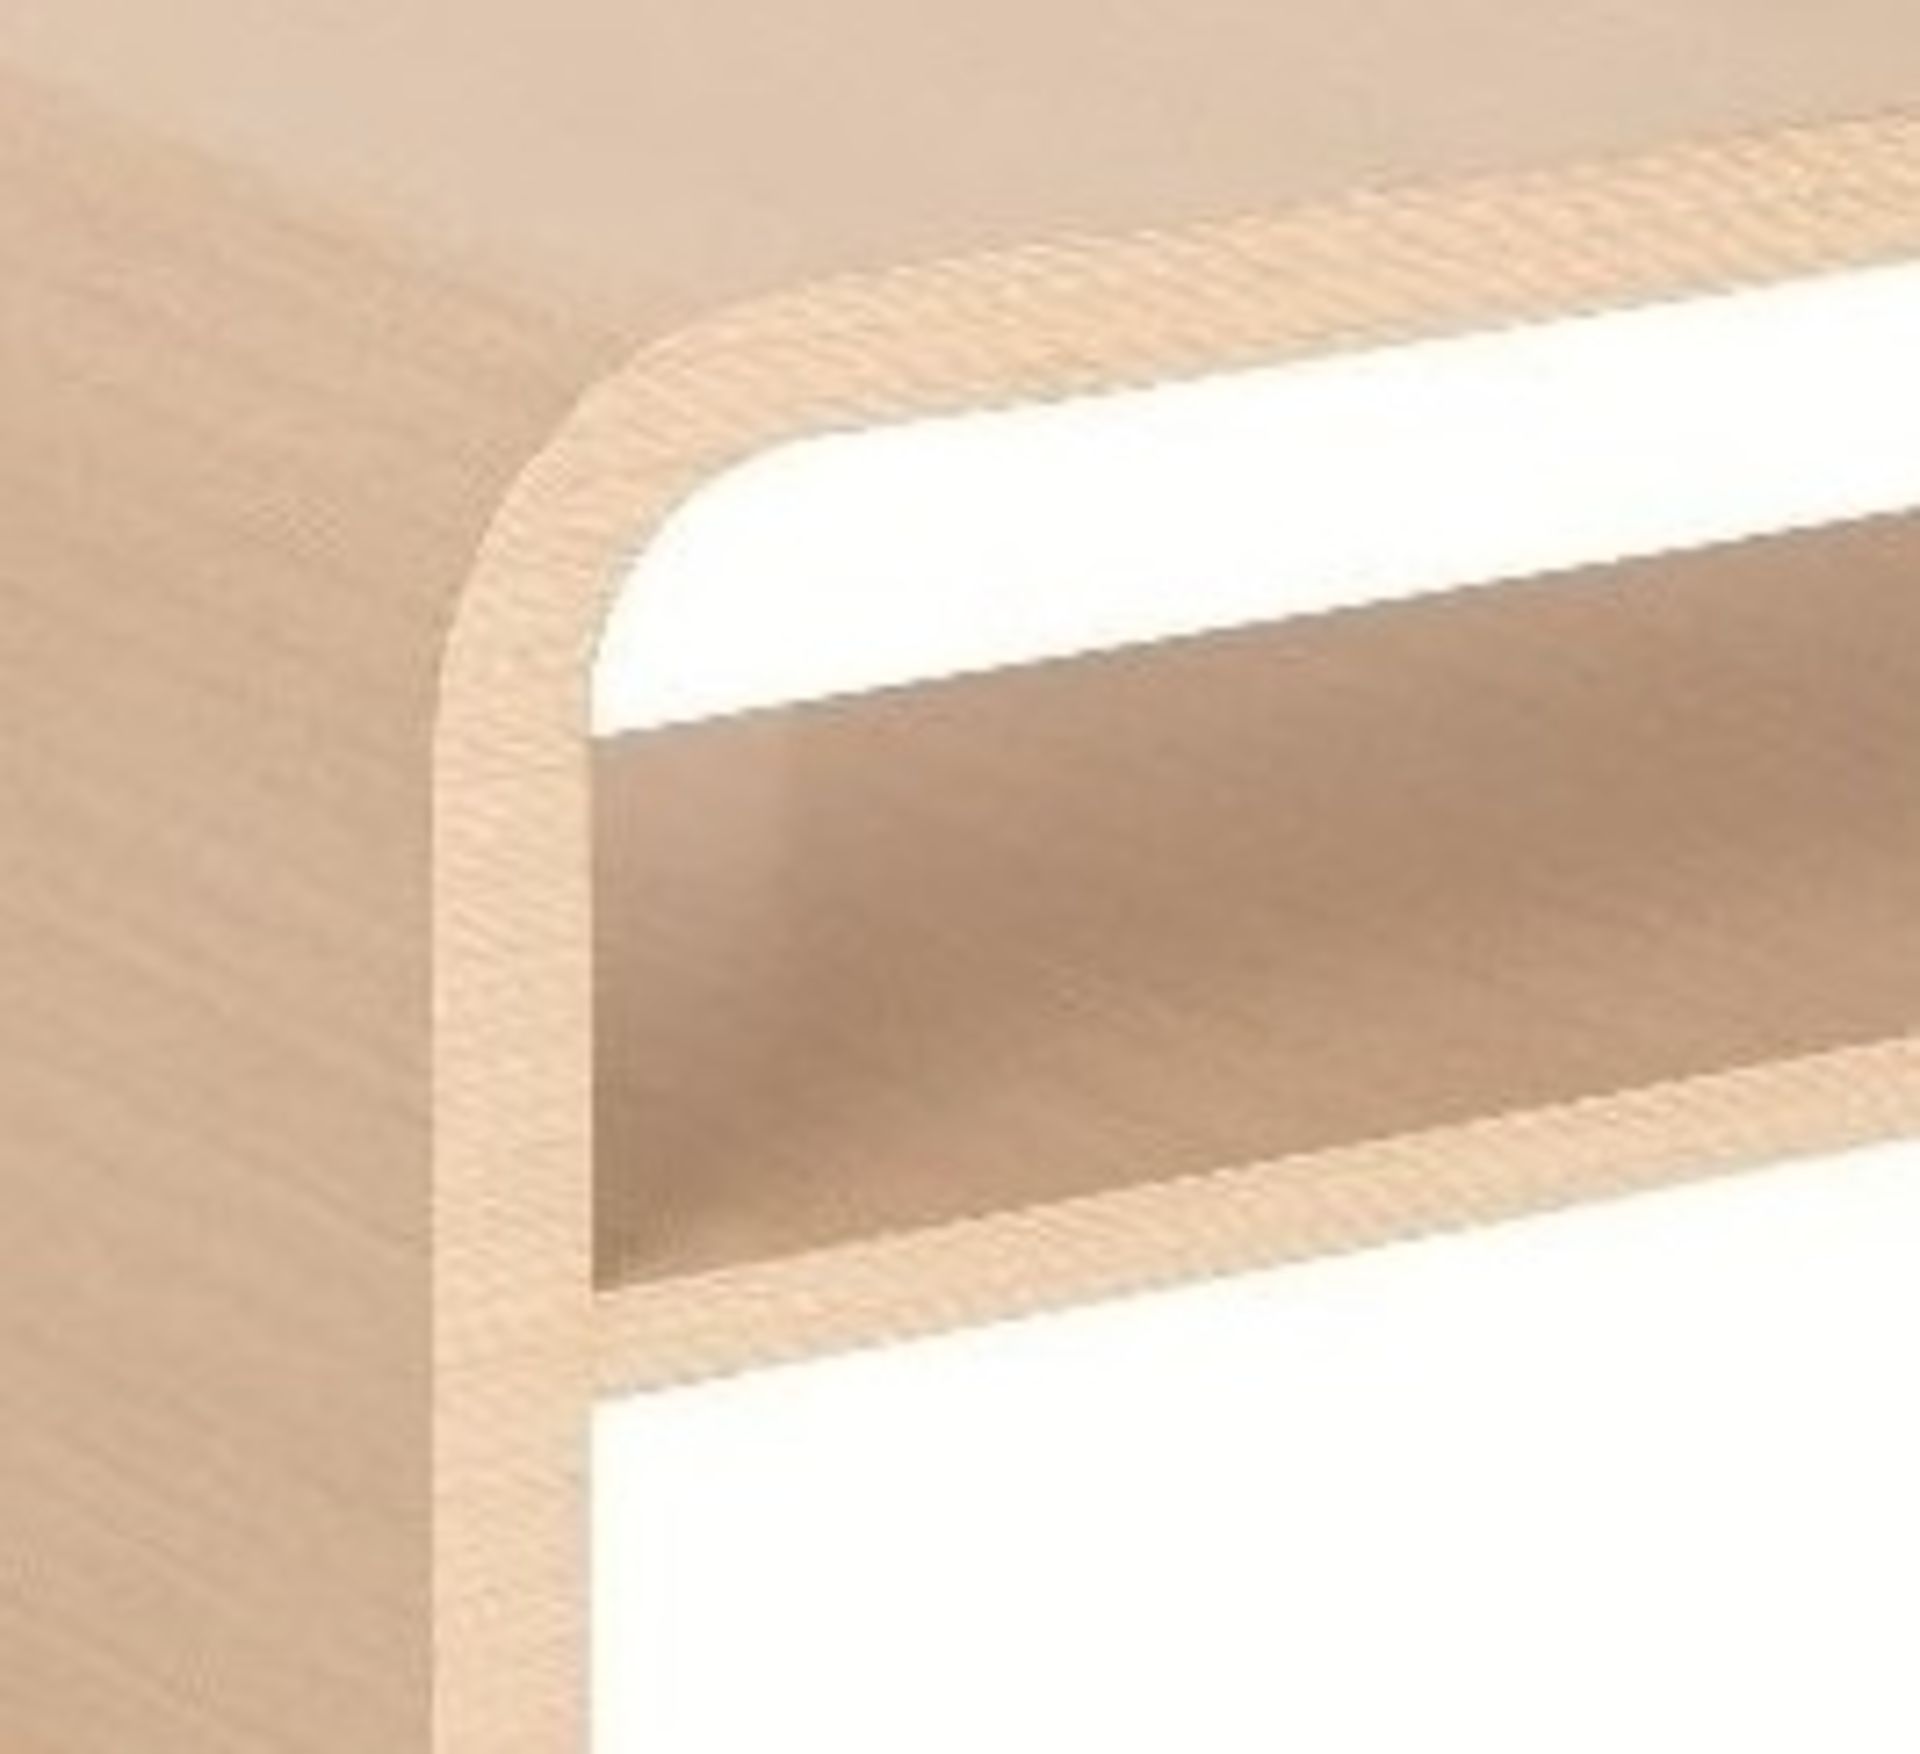 1 x Vogue ARC Bathroom Shelving Unit - PLEASE NOTE THAT THIS UNIT IS FINISHED IN OAK - Type Series 1 - Image 2 of 2